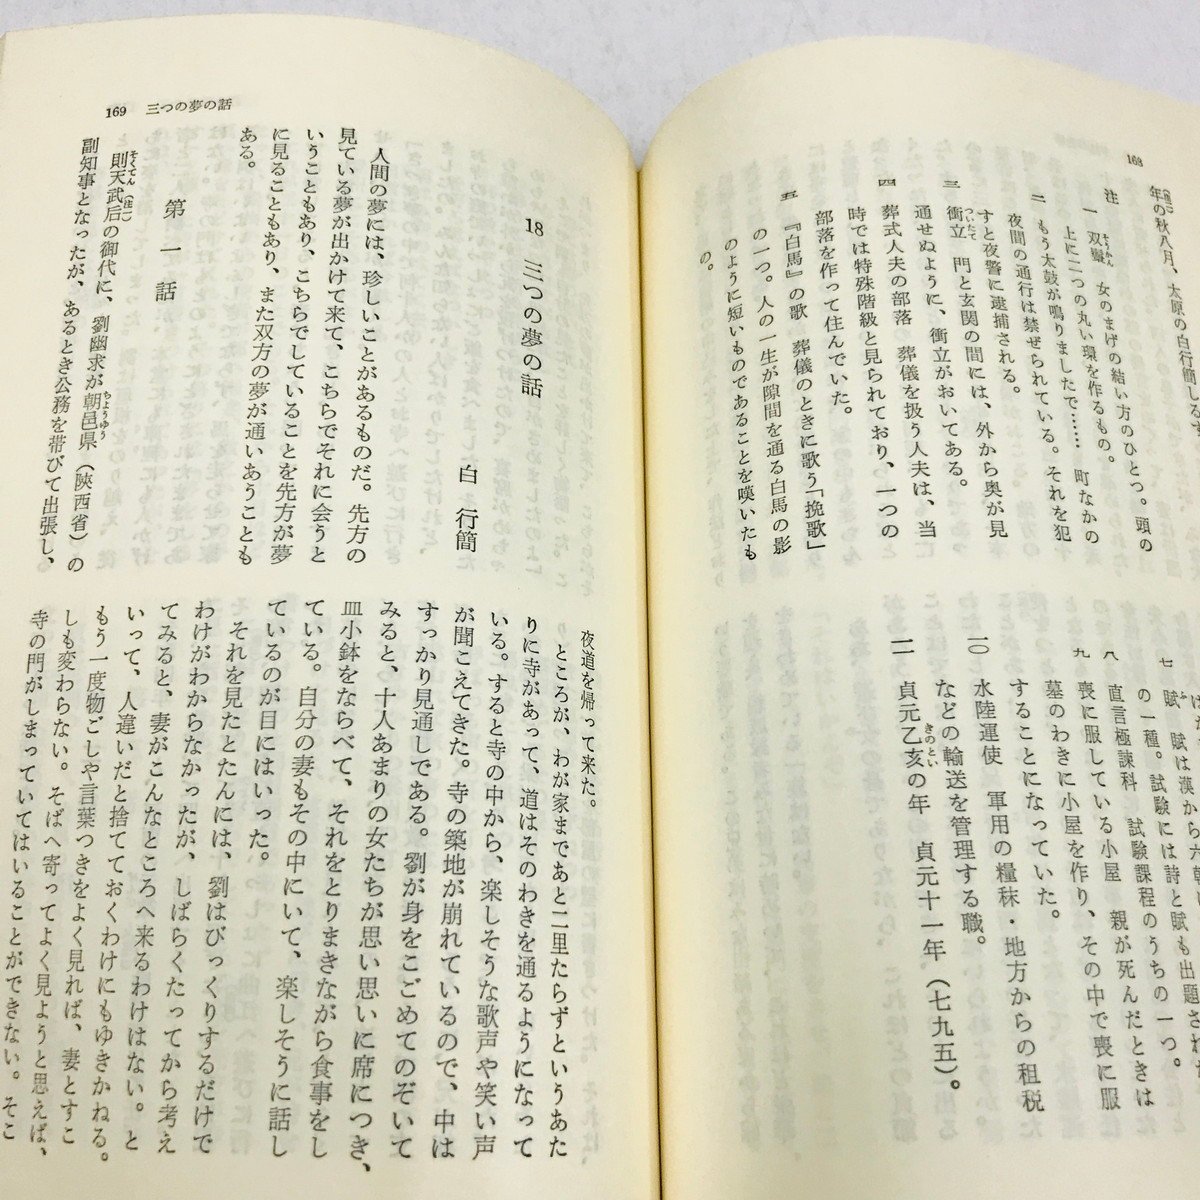 NA/L/東洋文庫 唐代伝奇集全2巻/2冊セット/訳:前野直彬/平凡社/1982年発行/東洋文庫2、16/傷みあり_画像5